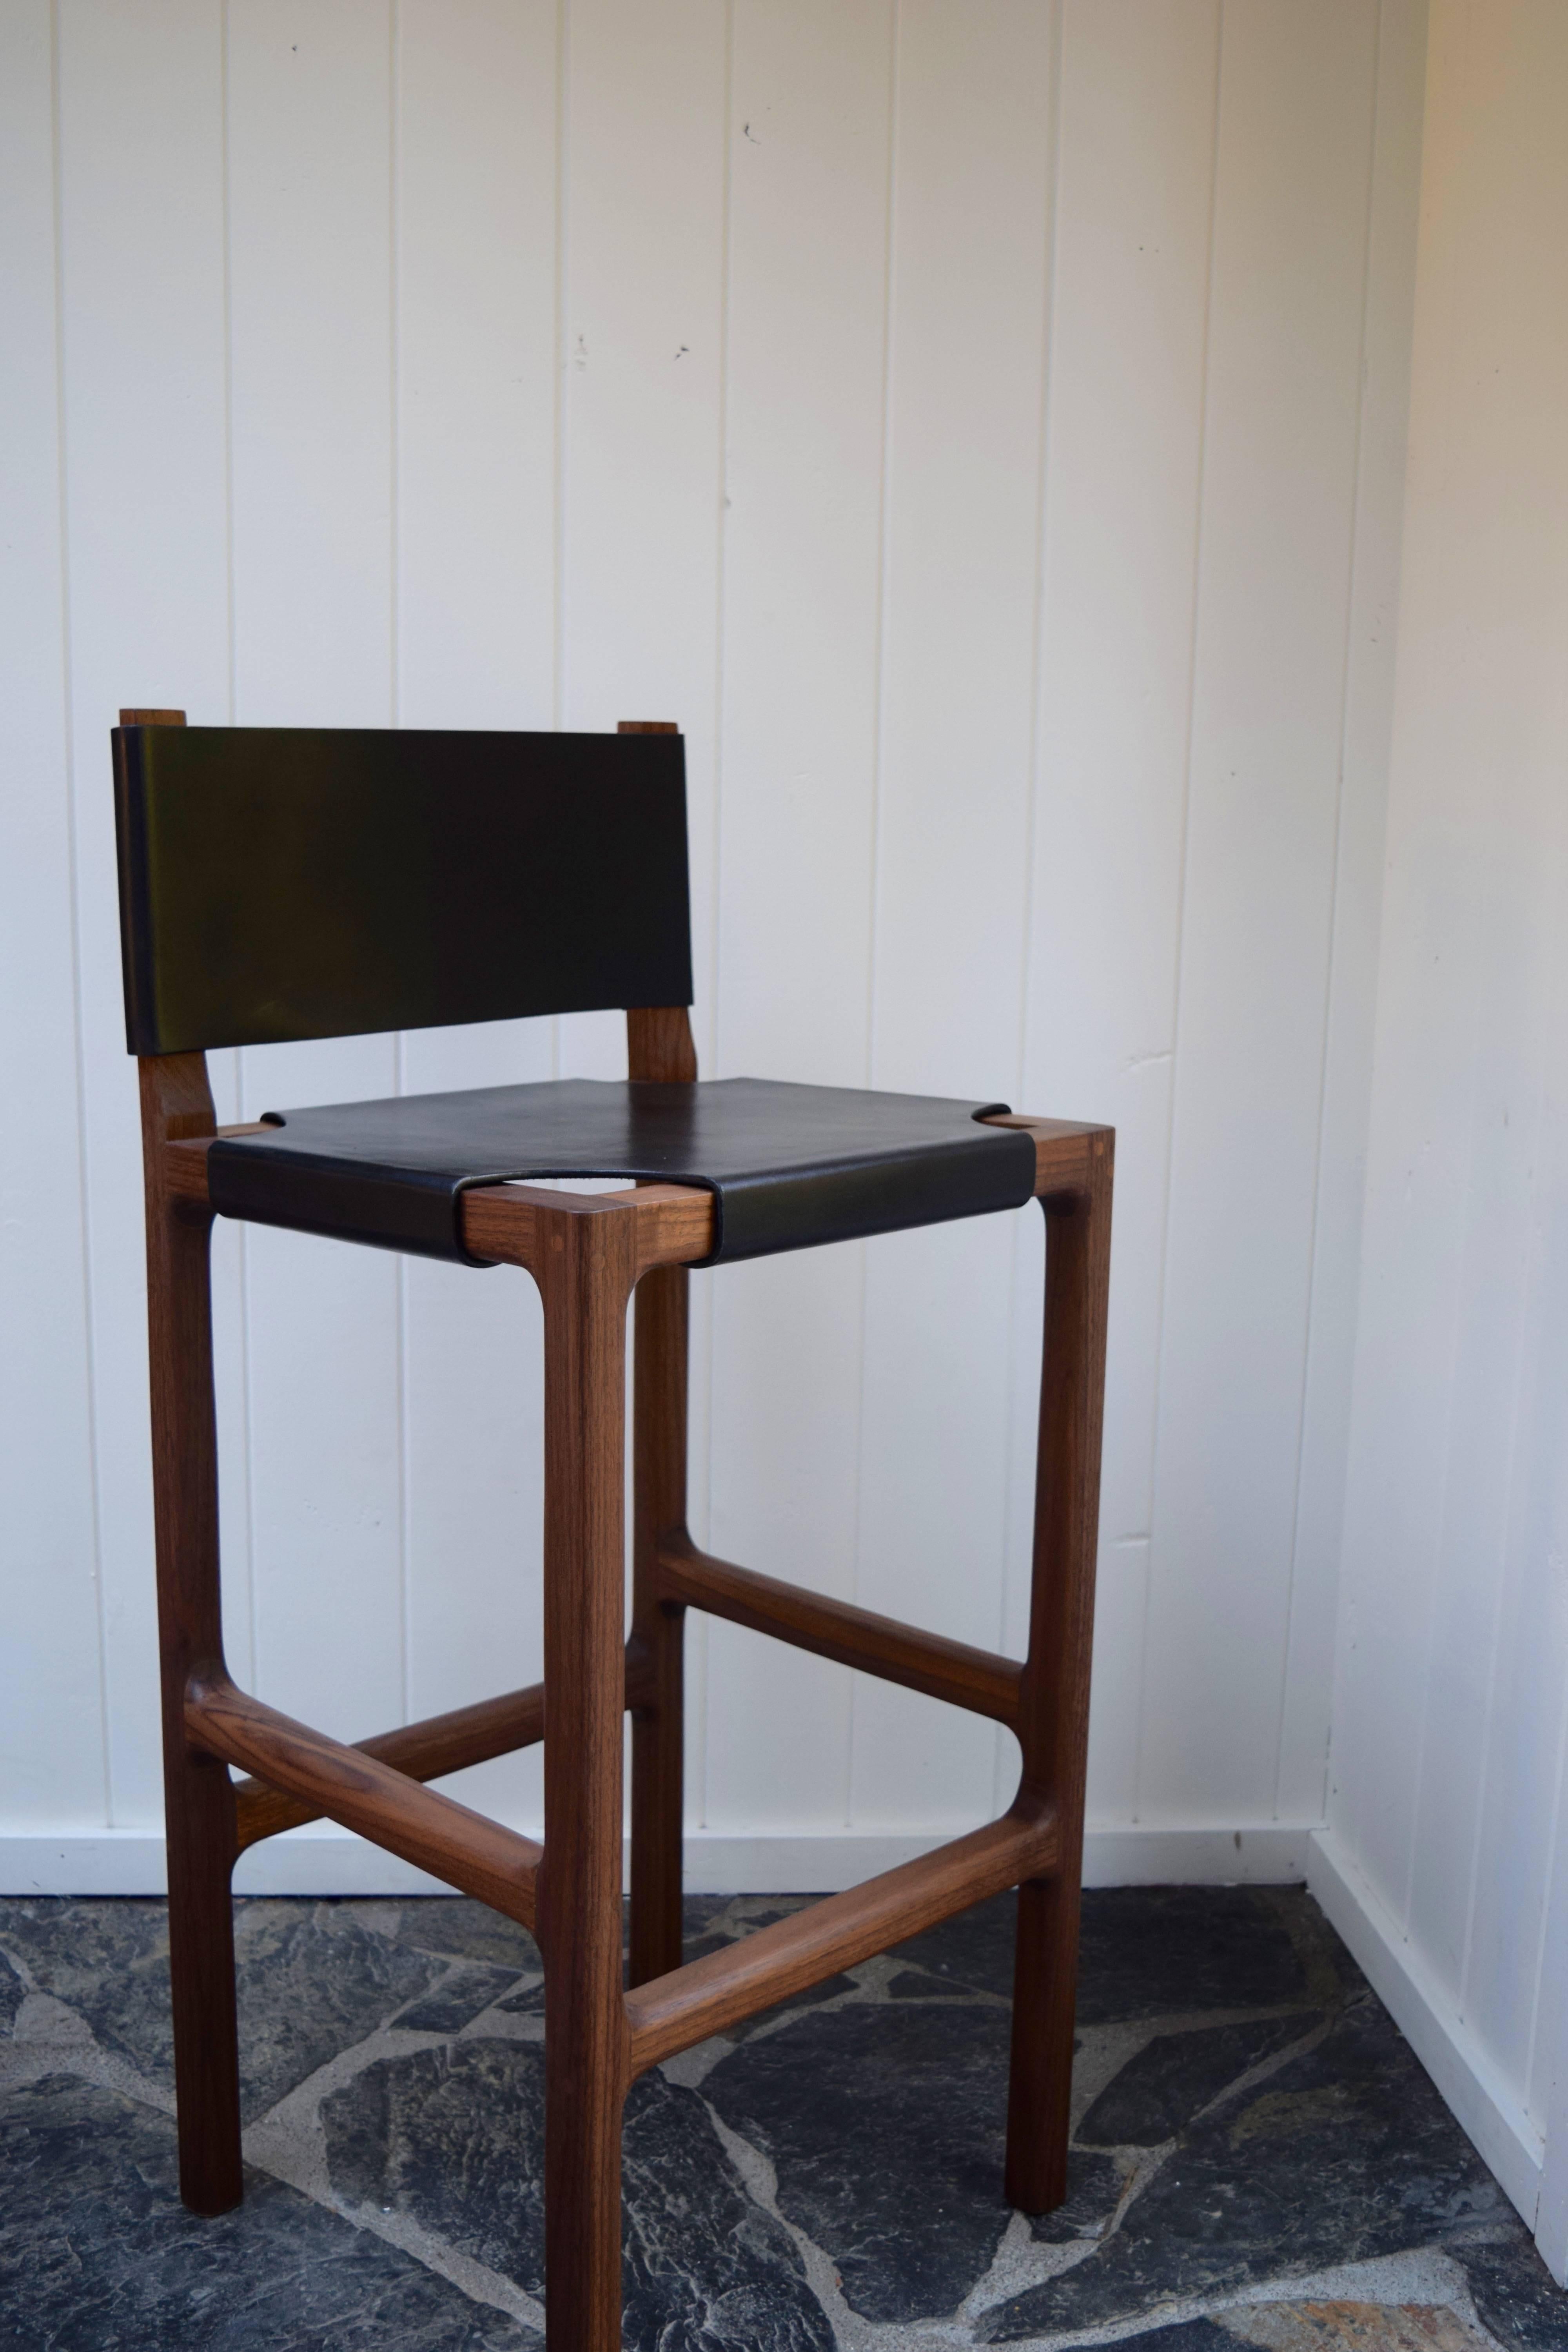 This is a walnut counter stool with a stretched leather seat and back. The frame is solid walnut with a gentle radius at the interior joints and softly rounded edges. The leather is 10 oz vegetable tanned leather that has been stretched across the